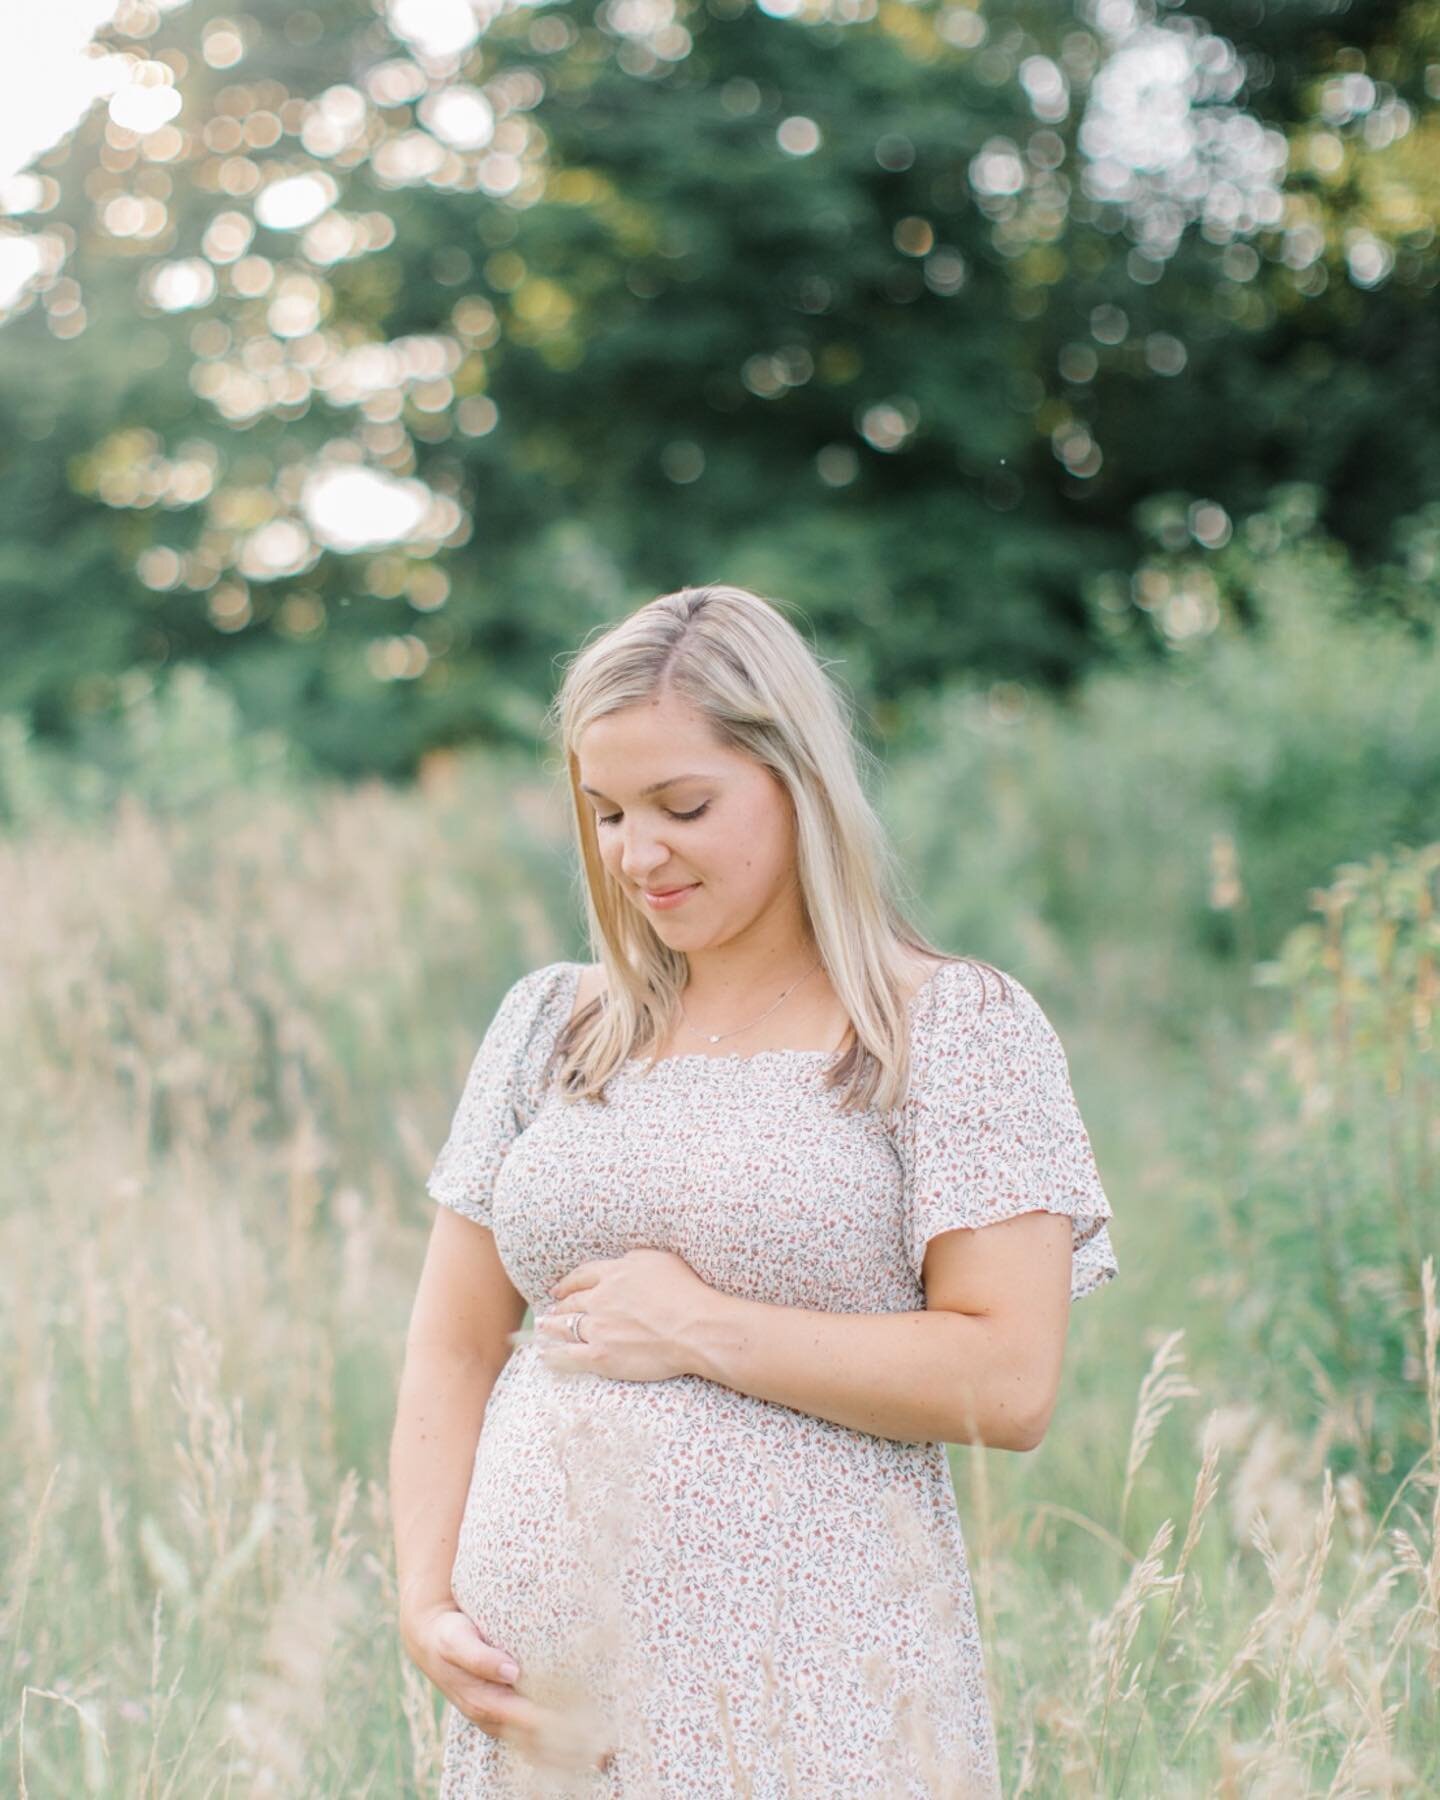 More summer days like this!!! I love getting to celebrate special seasons like pregnancy. It&rsquo;s the most beautiful thing. 🤍 Thanks for letting me document these parts of your story!